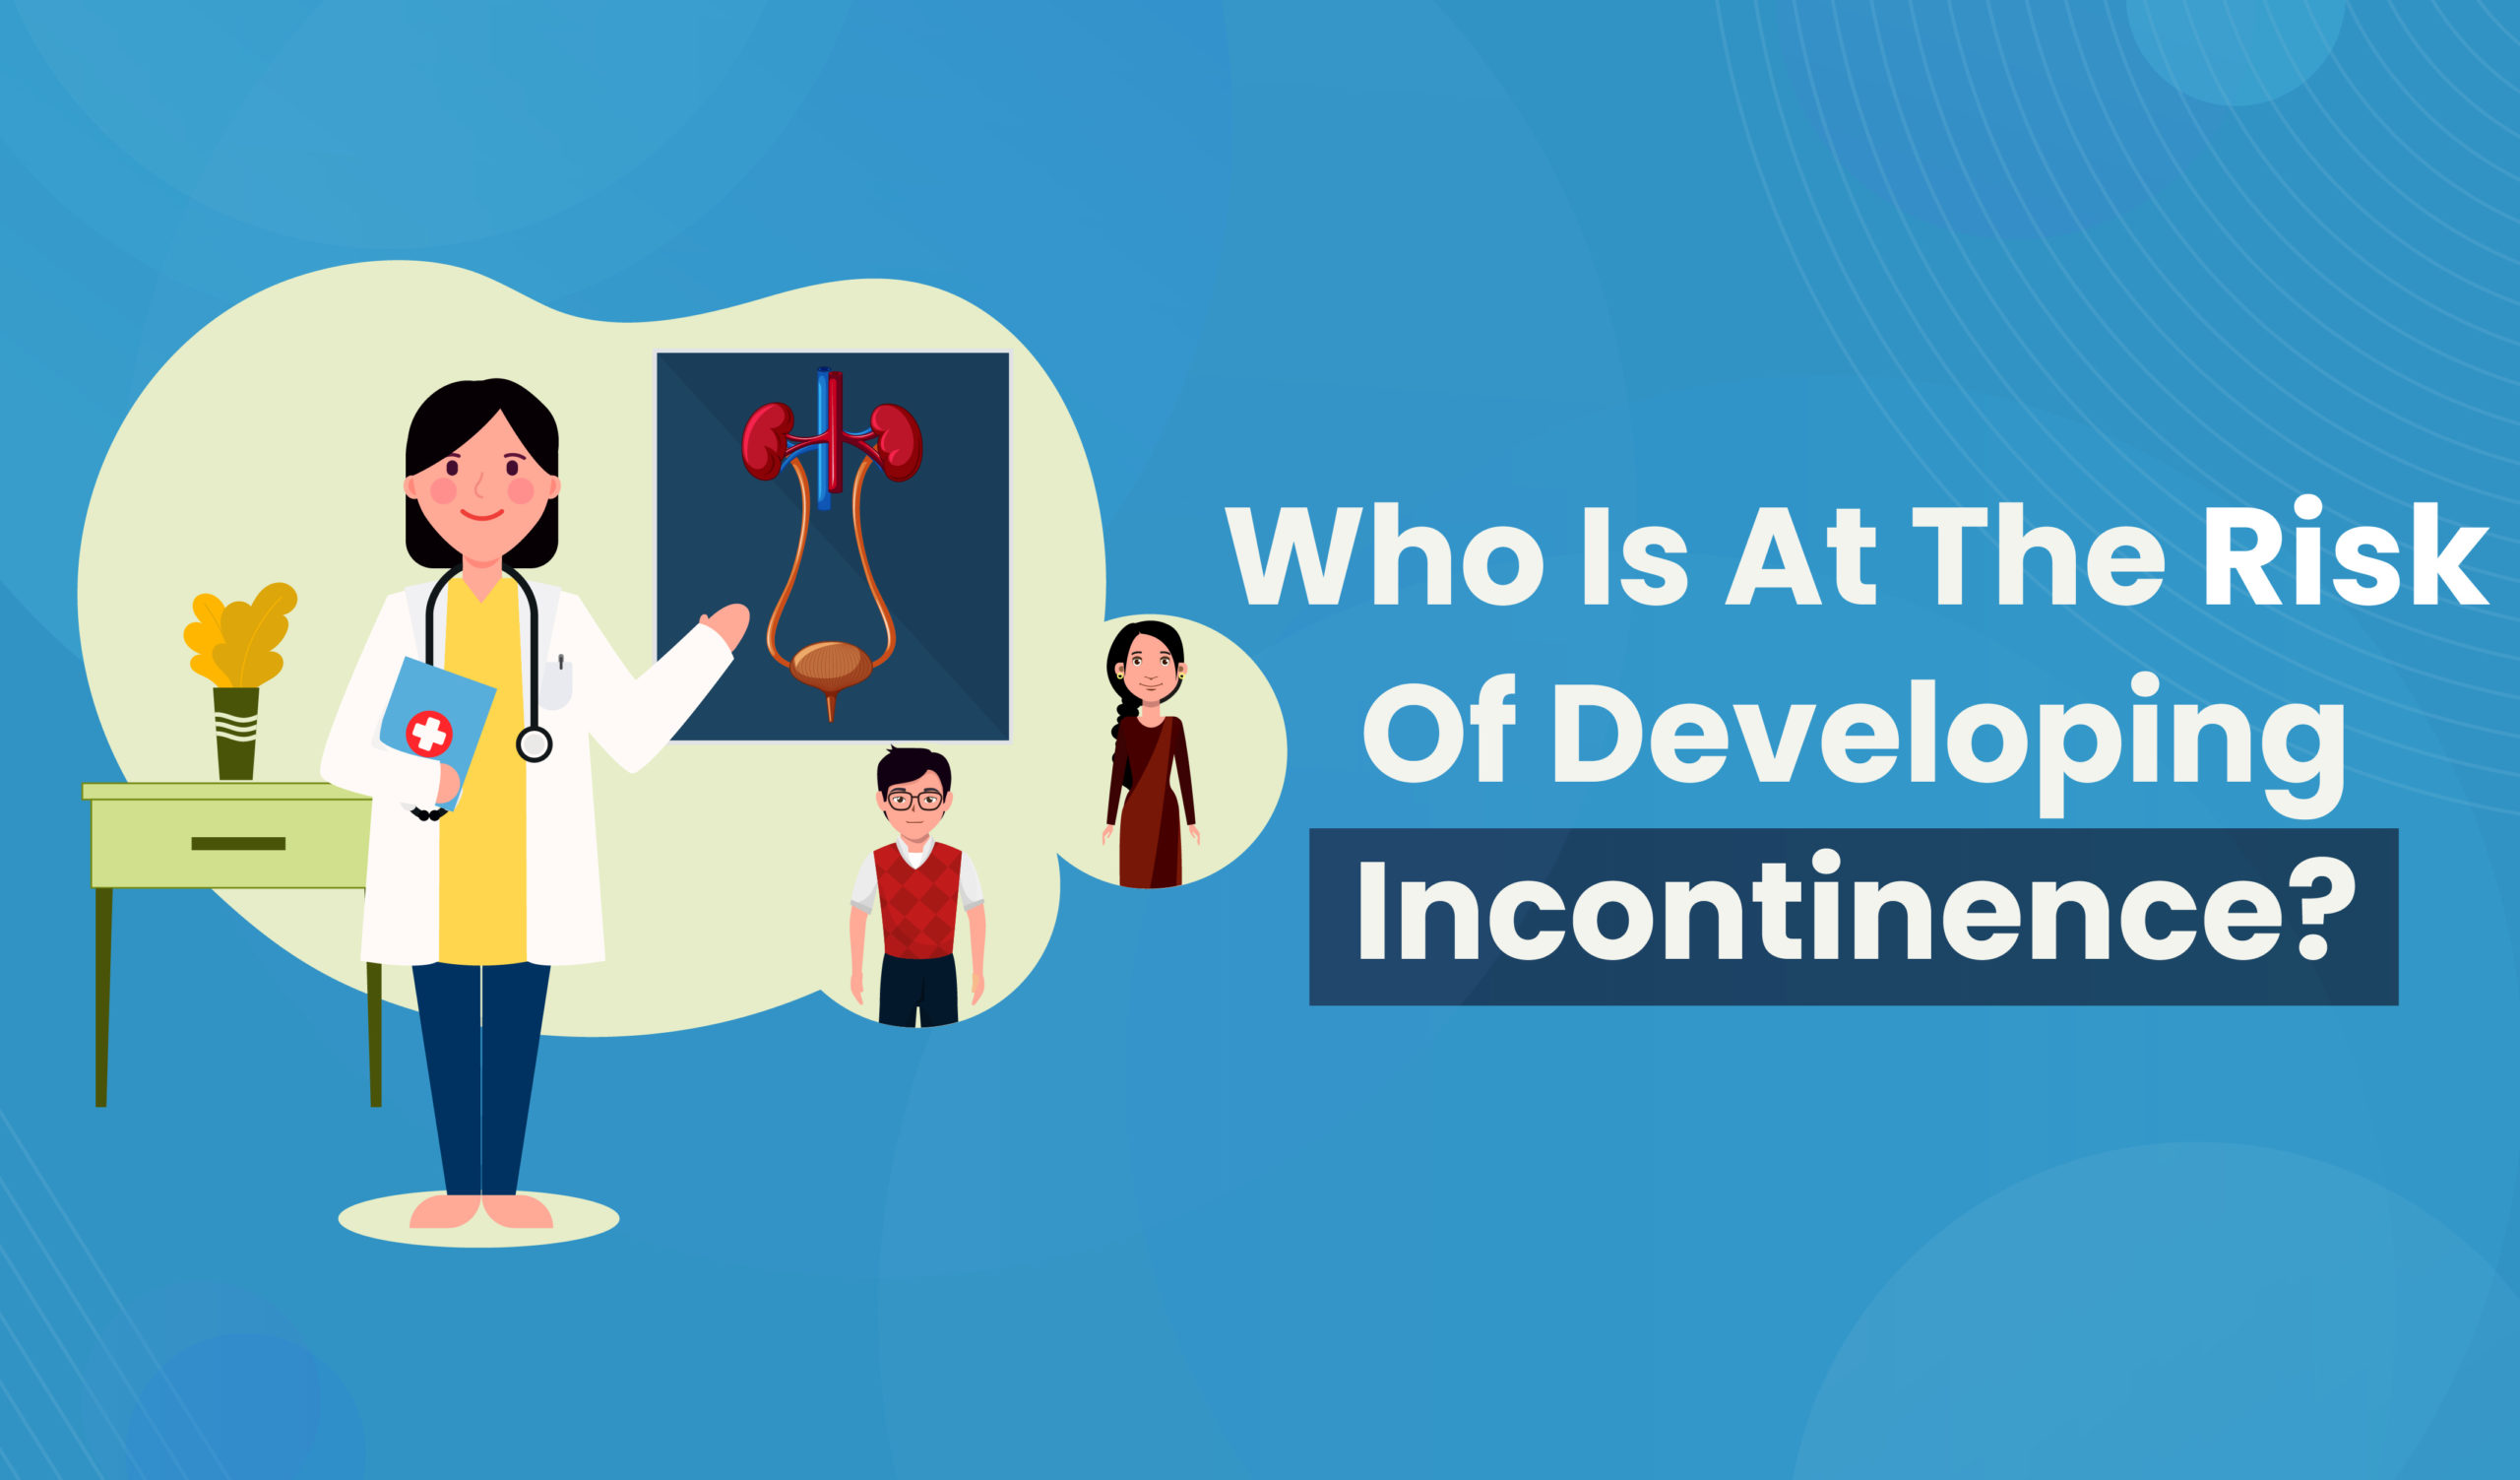 Who is at the risk of developing incontinence